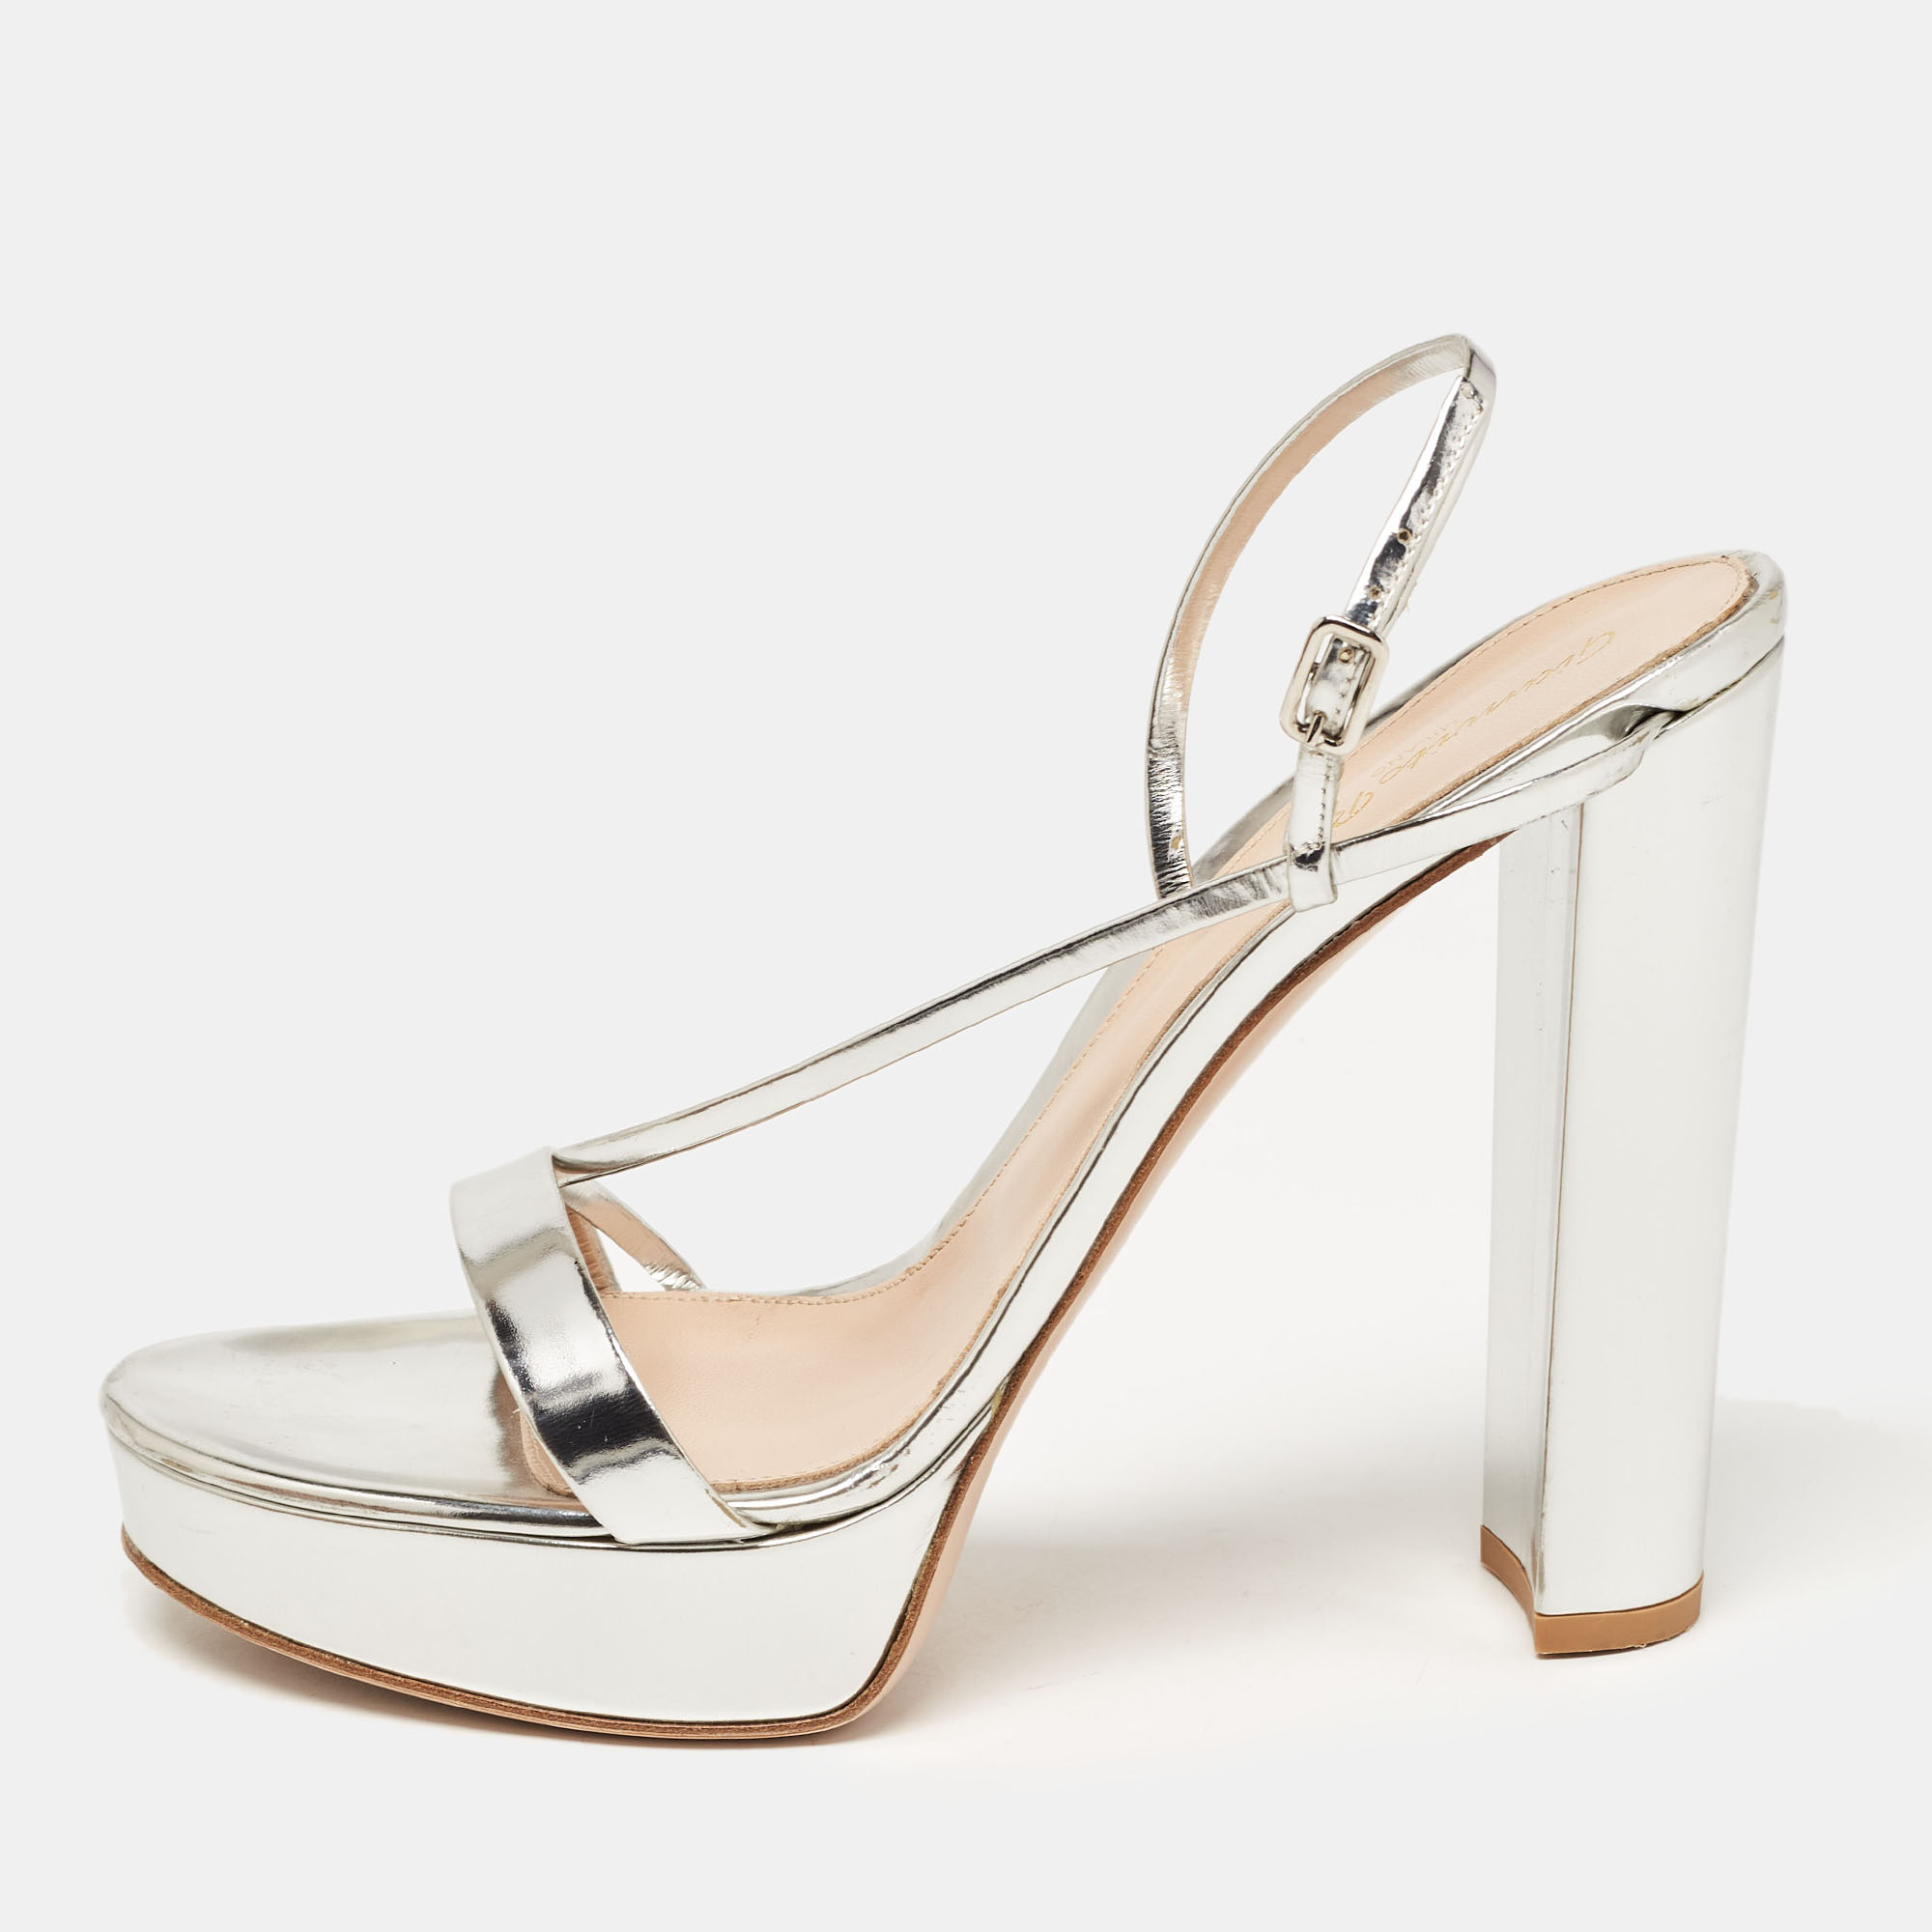 Gianvito Rossi Silver Leather Ankle Strap Sandals Size 40.5